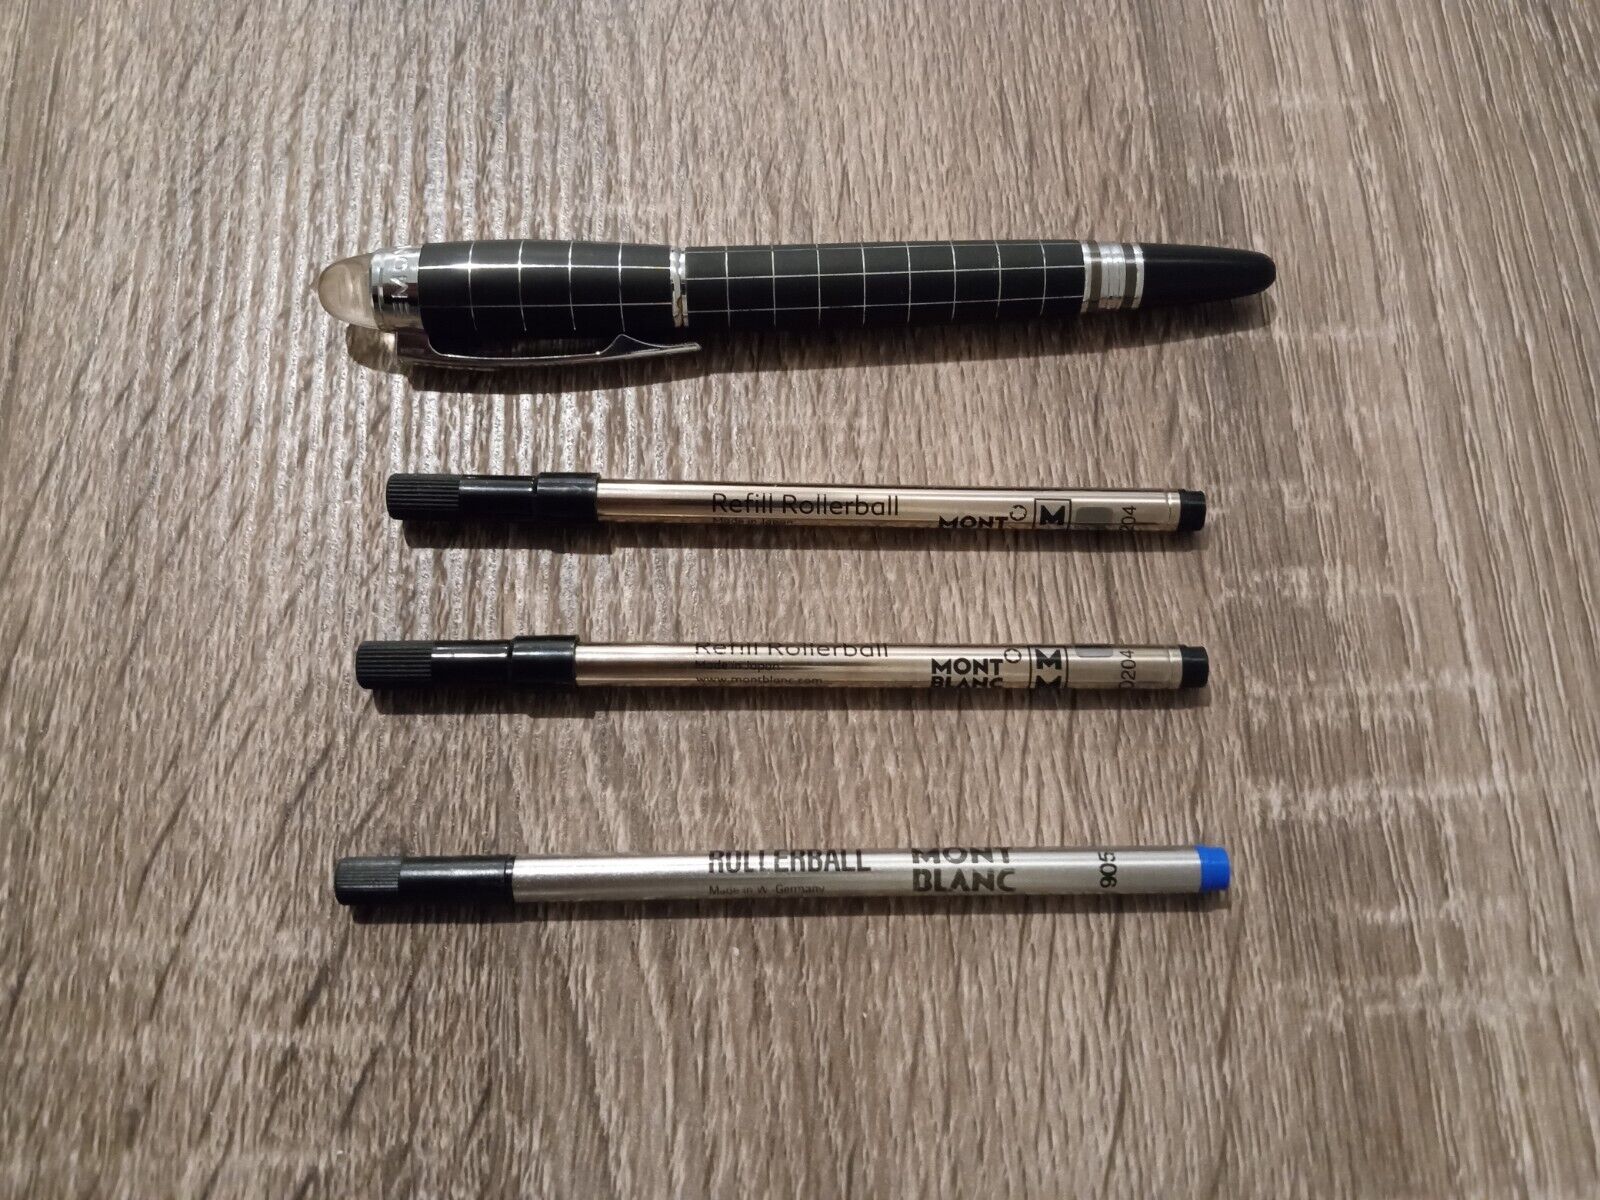 MONTBLANC Starwalker Rollerball Pen (Plaid Grid Stripes) with extra ink refills